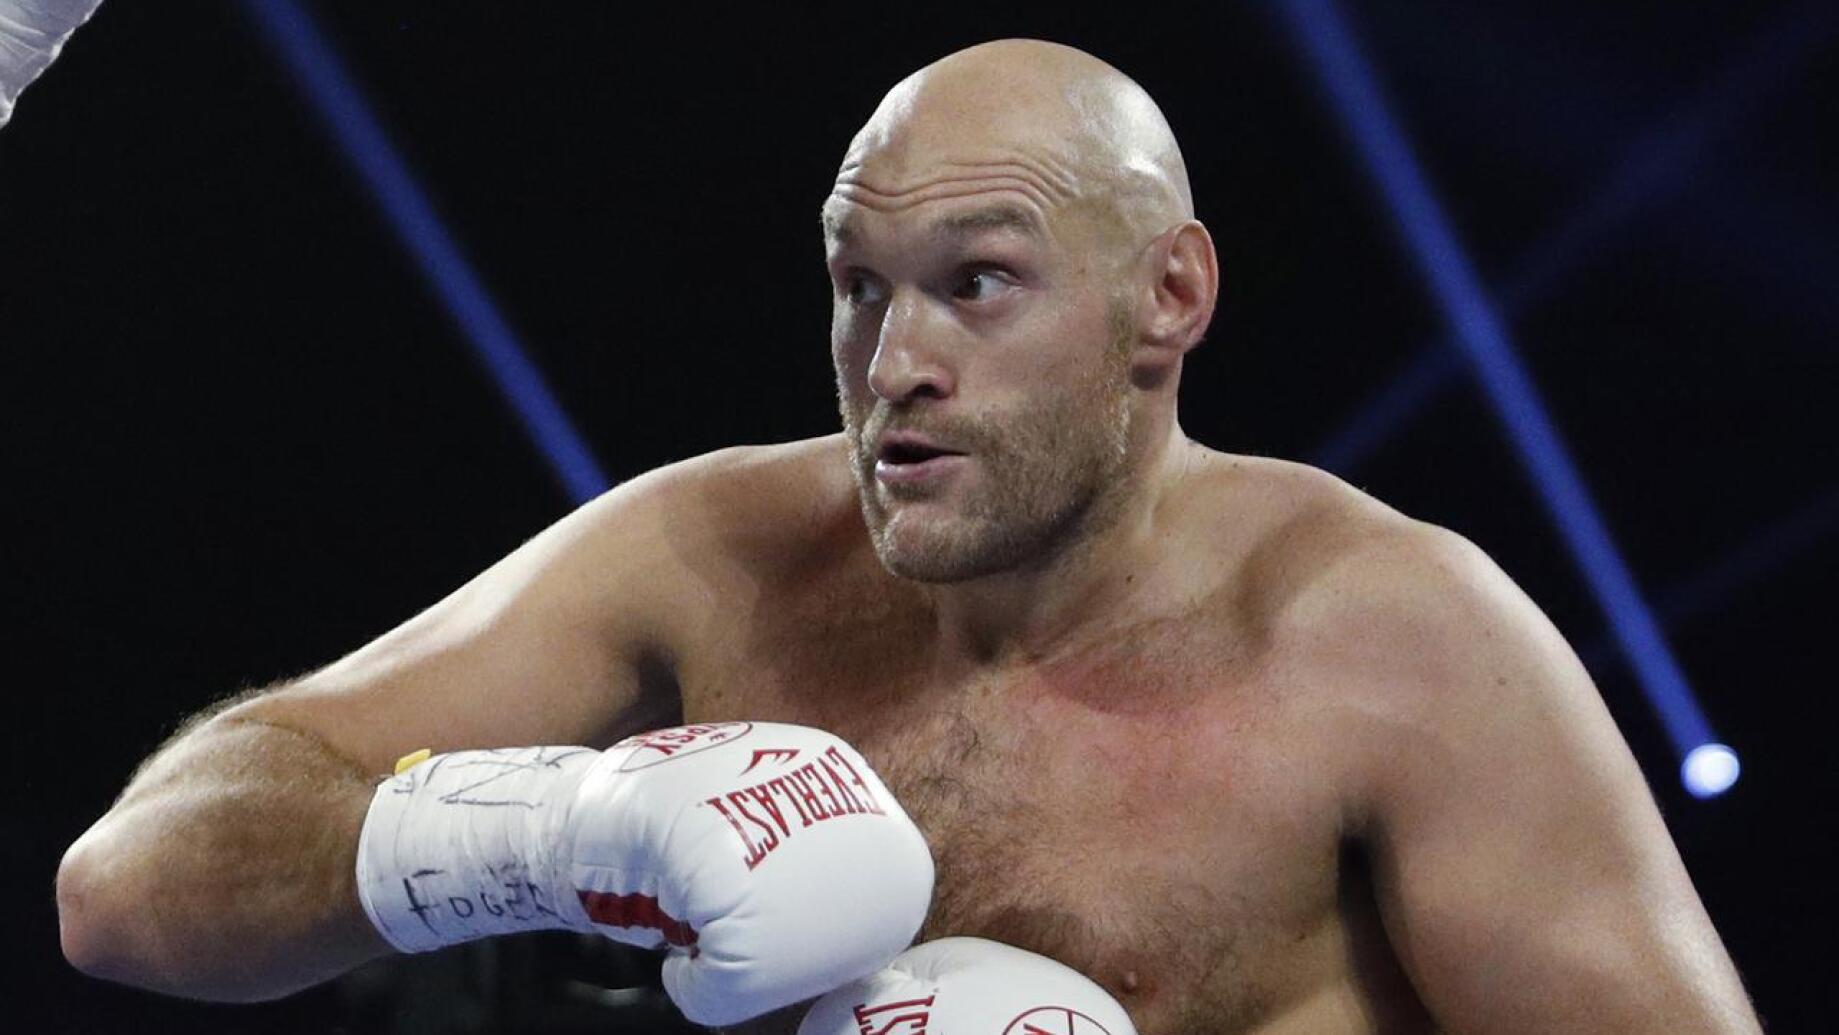 Boxing world champion Tyson Fury has called on the British government to clamp down harder on knife crime after his cousin was stabbed to death